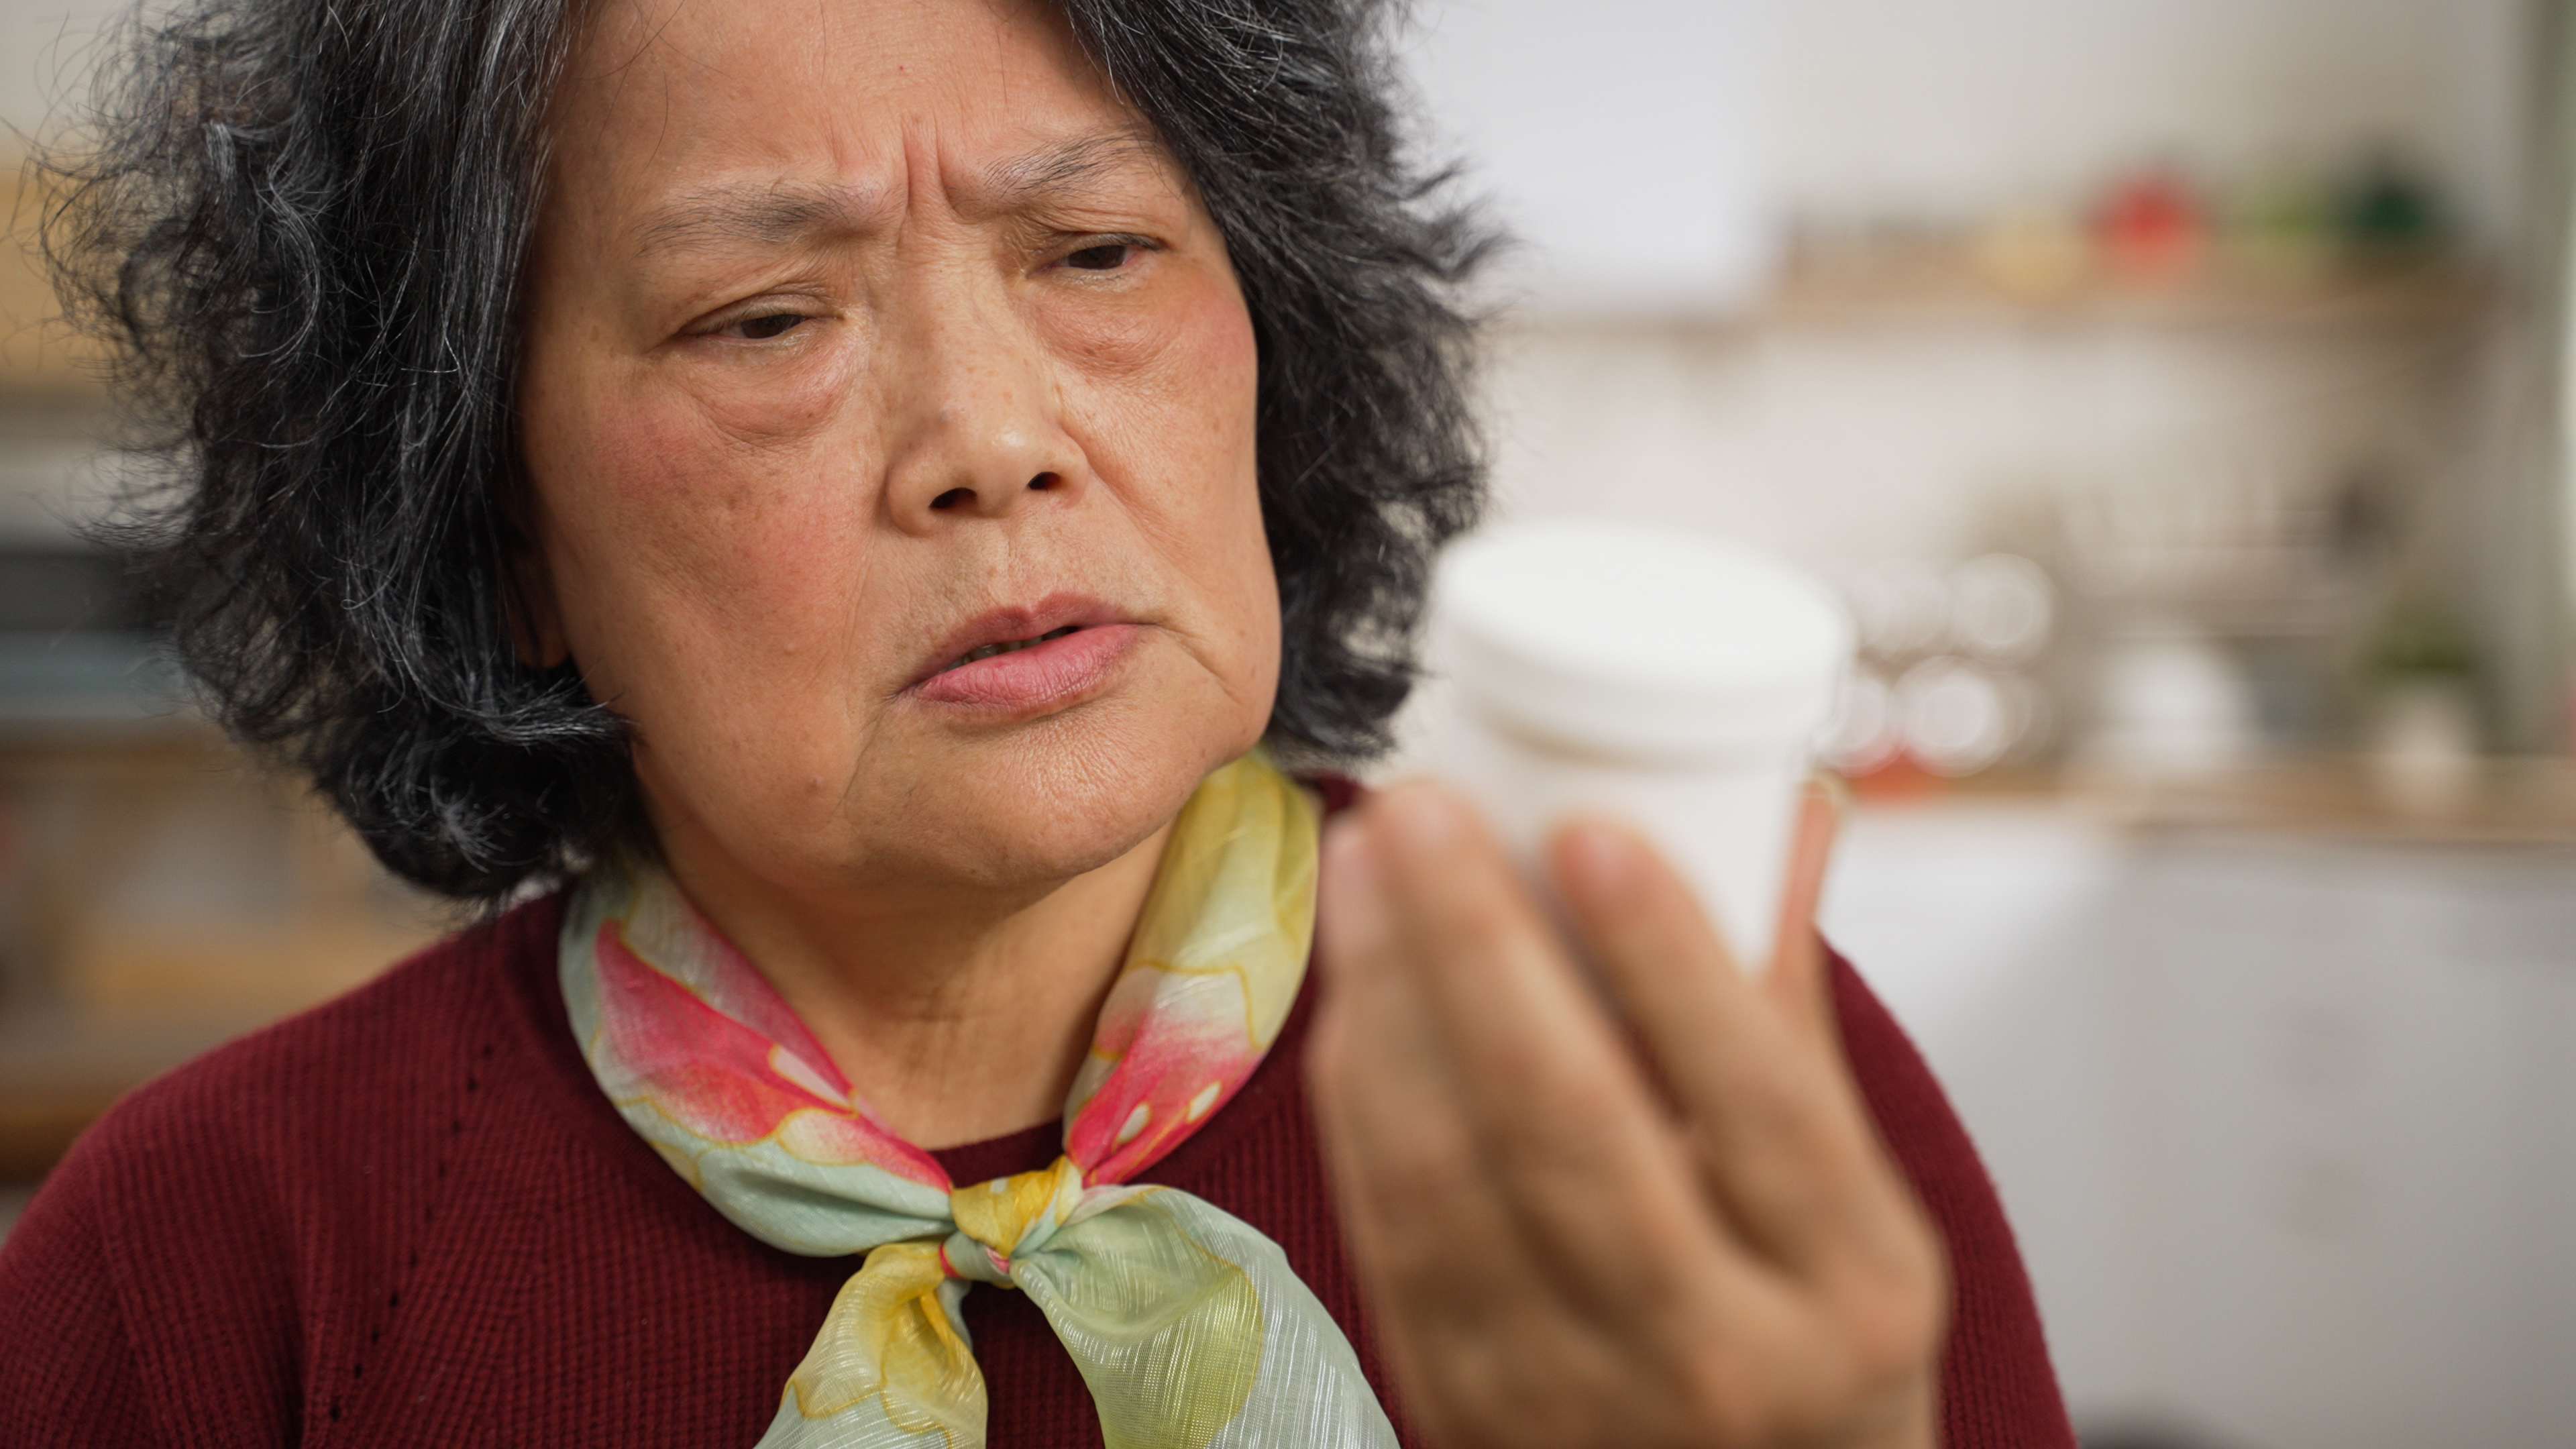 Woman frowning at a prescription bottle in her hand, appearing concerned or confused